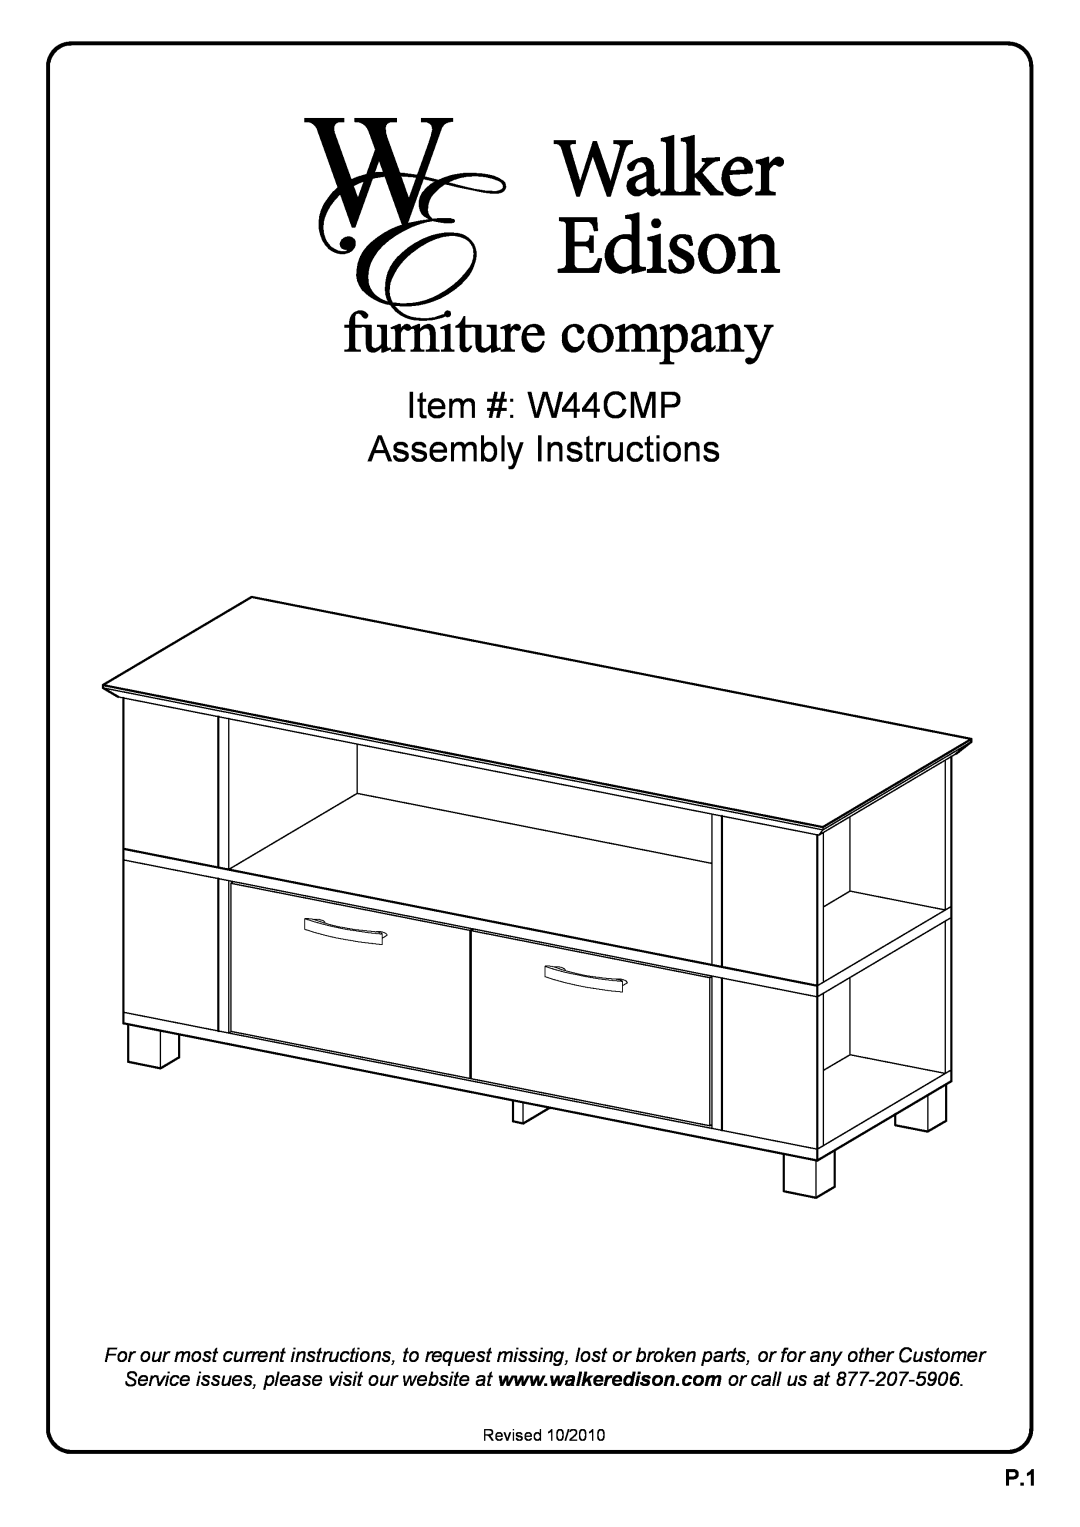 Walker W44CMPBL manual Item # W44CMP Assembly Instructions, Revised 10/2010 